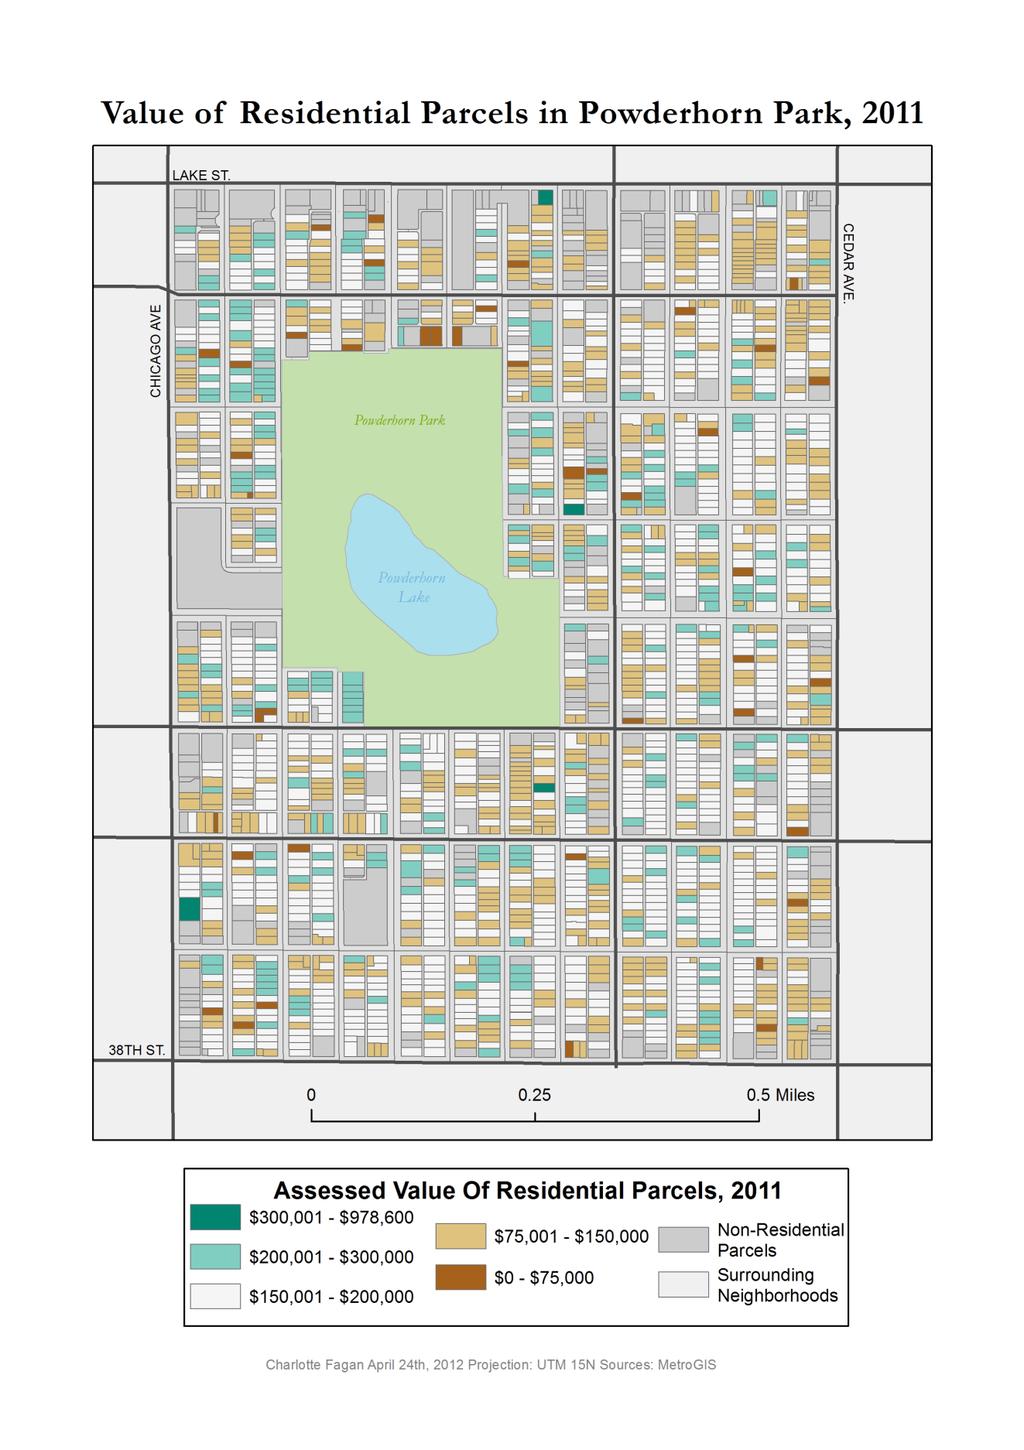 Map 9: Value of Residential Parcels, 2011